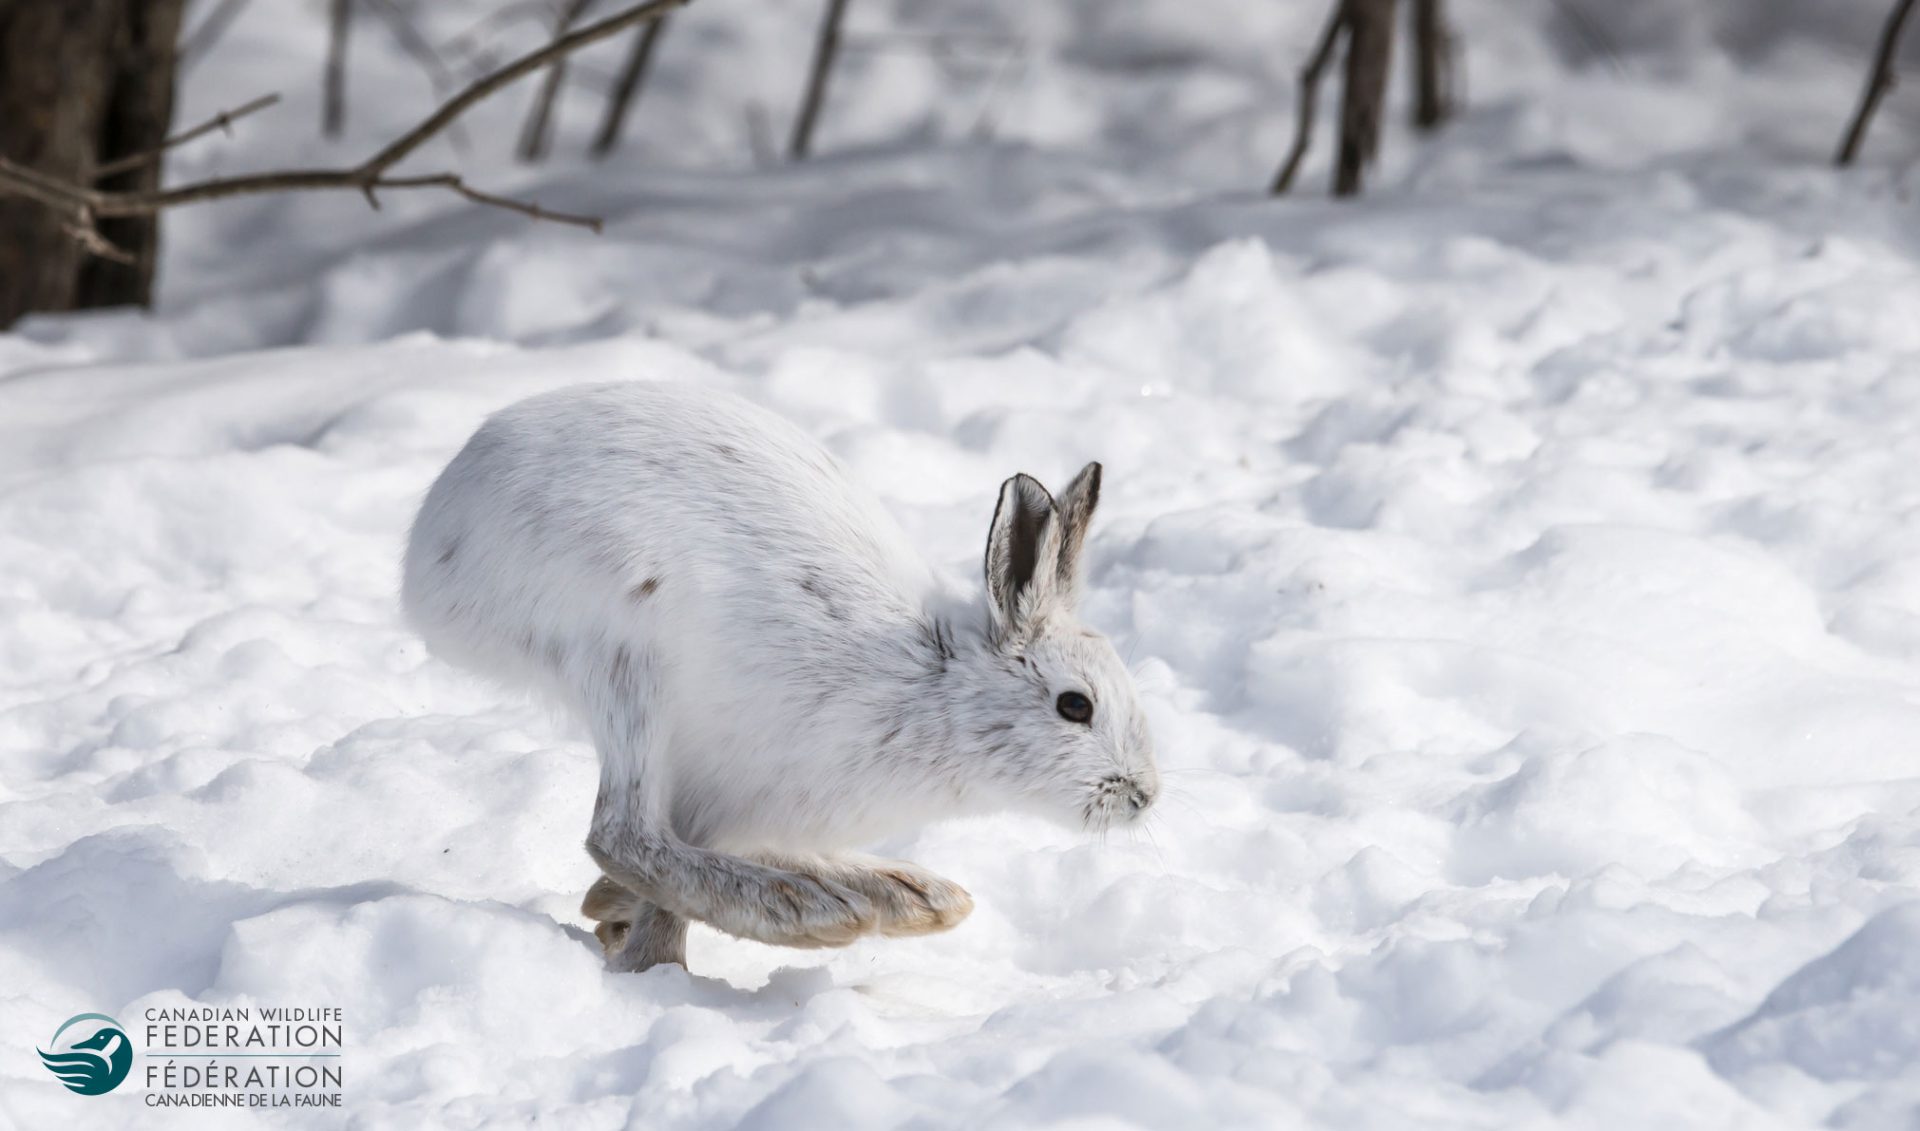 Diving into Winter – Your Connection to Wildlife